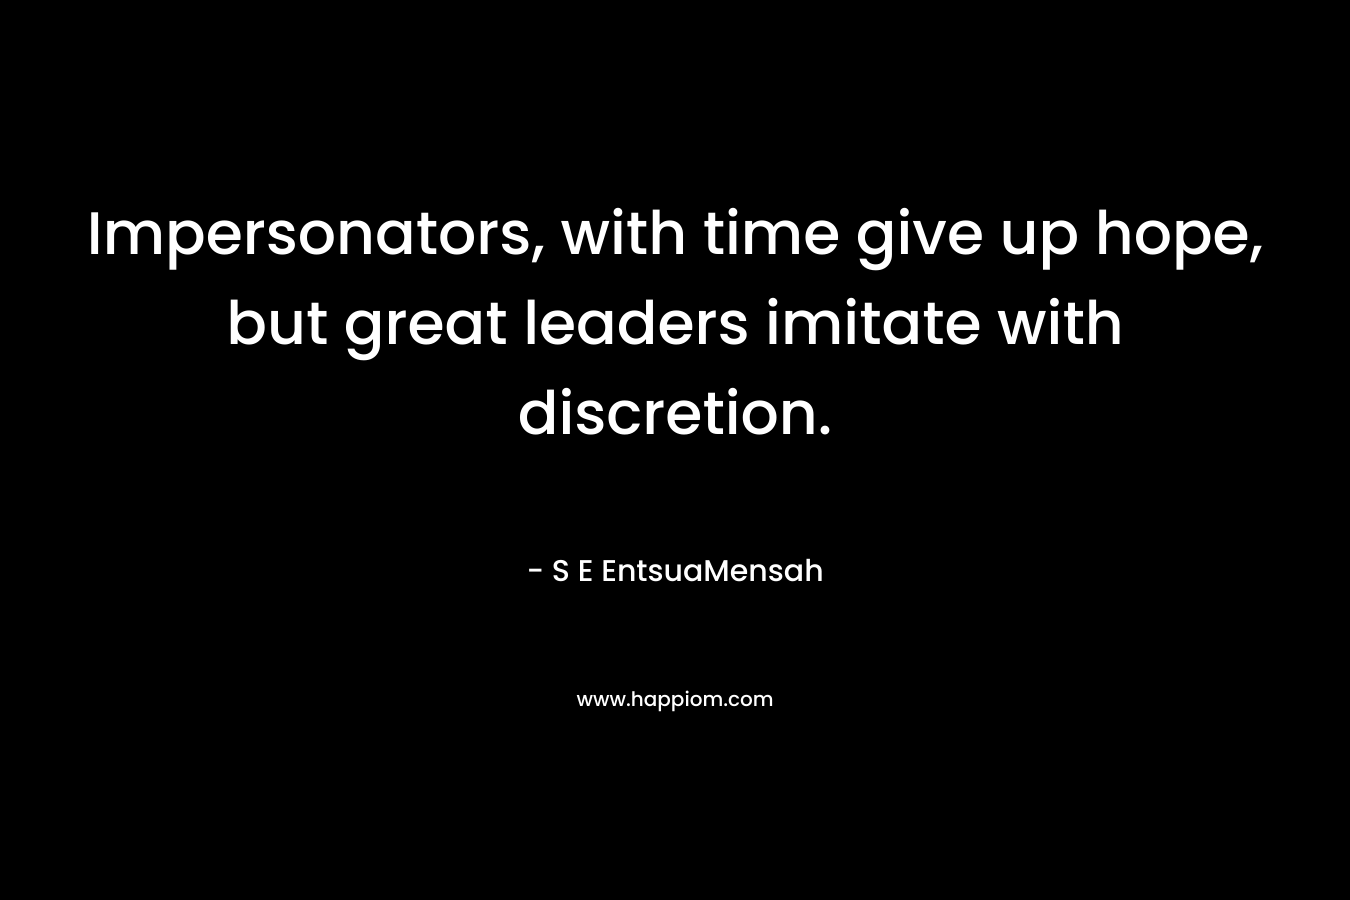 Impersonators, with time give up hope, but great leaders imitate with discretion. – S E EntsuaMensah